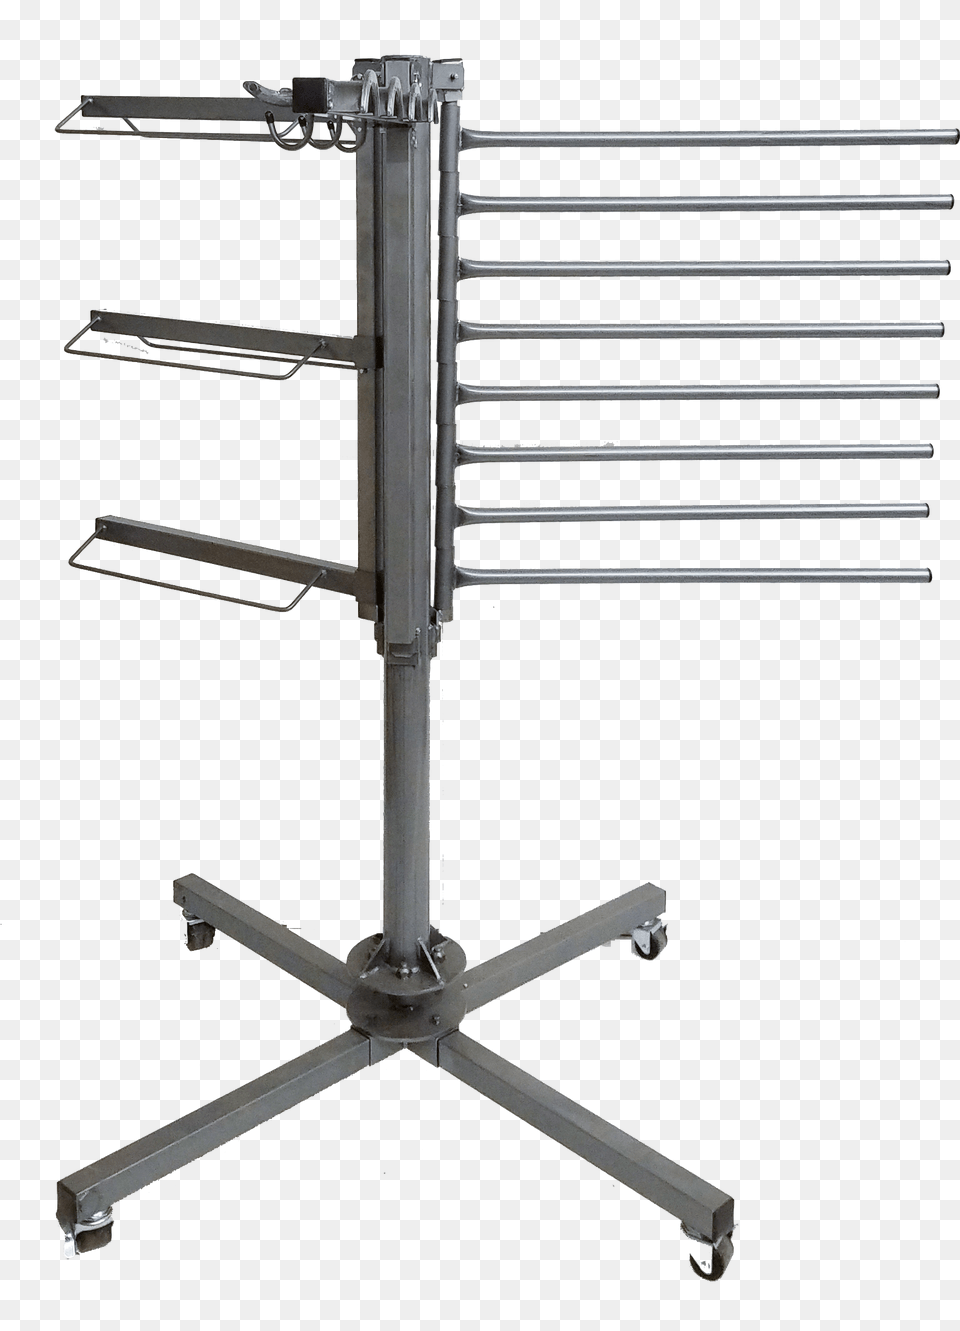 Rtr 1083 Ps Equiracks Tack Rack Rotary Versatile Multi Storage, Furniture, Drying Rack, Appliance, Ceiling Fan Free Png Download